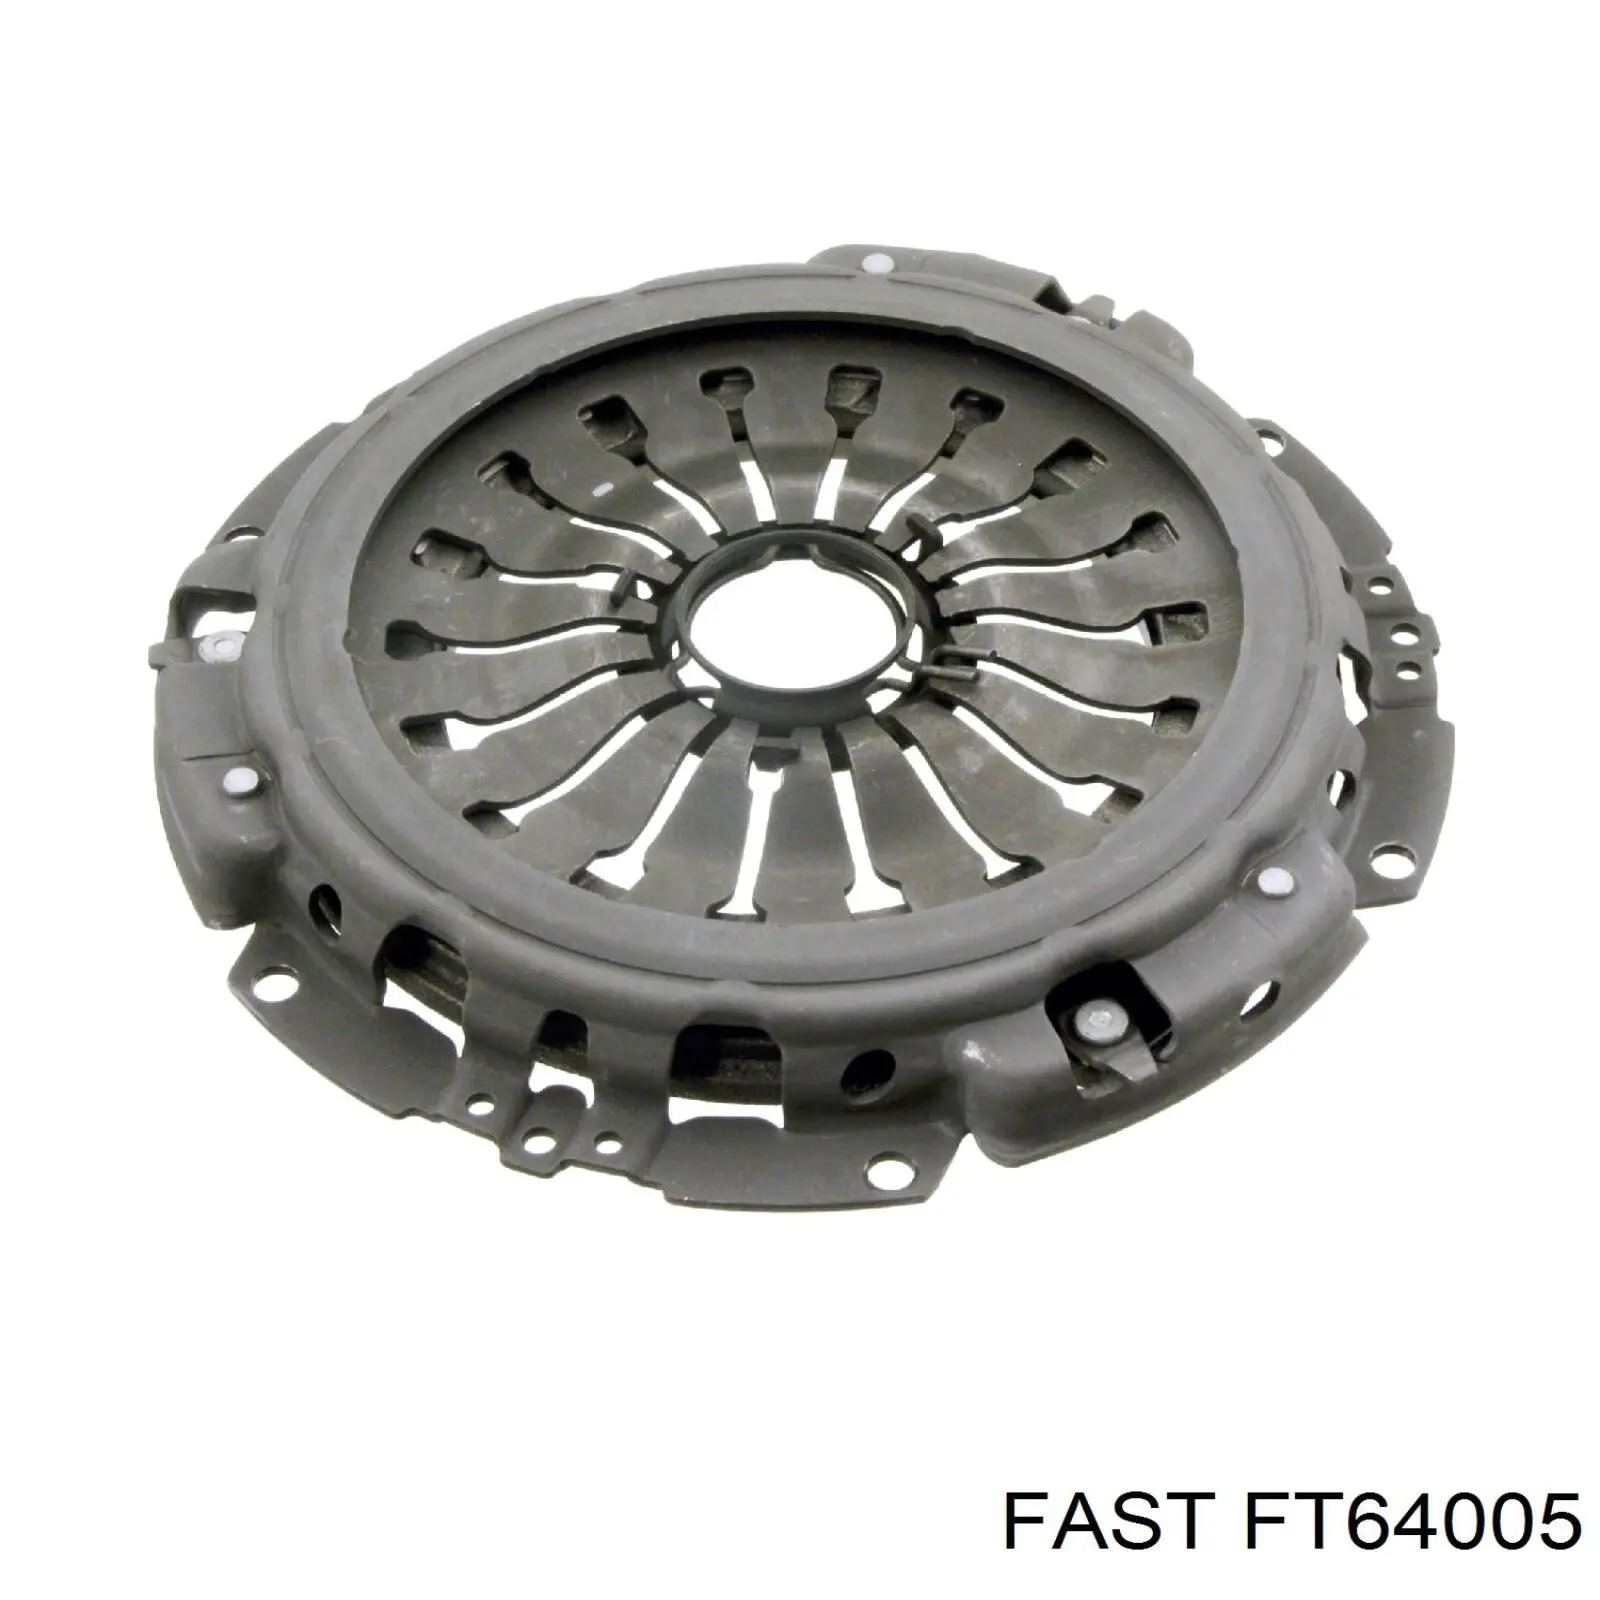 FT64005 Fast embrague